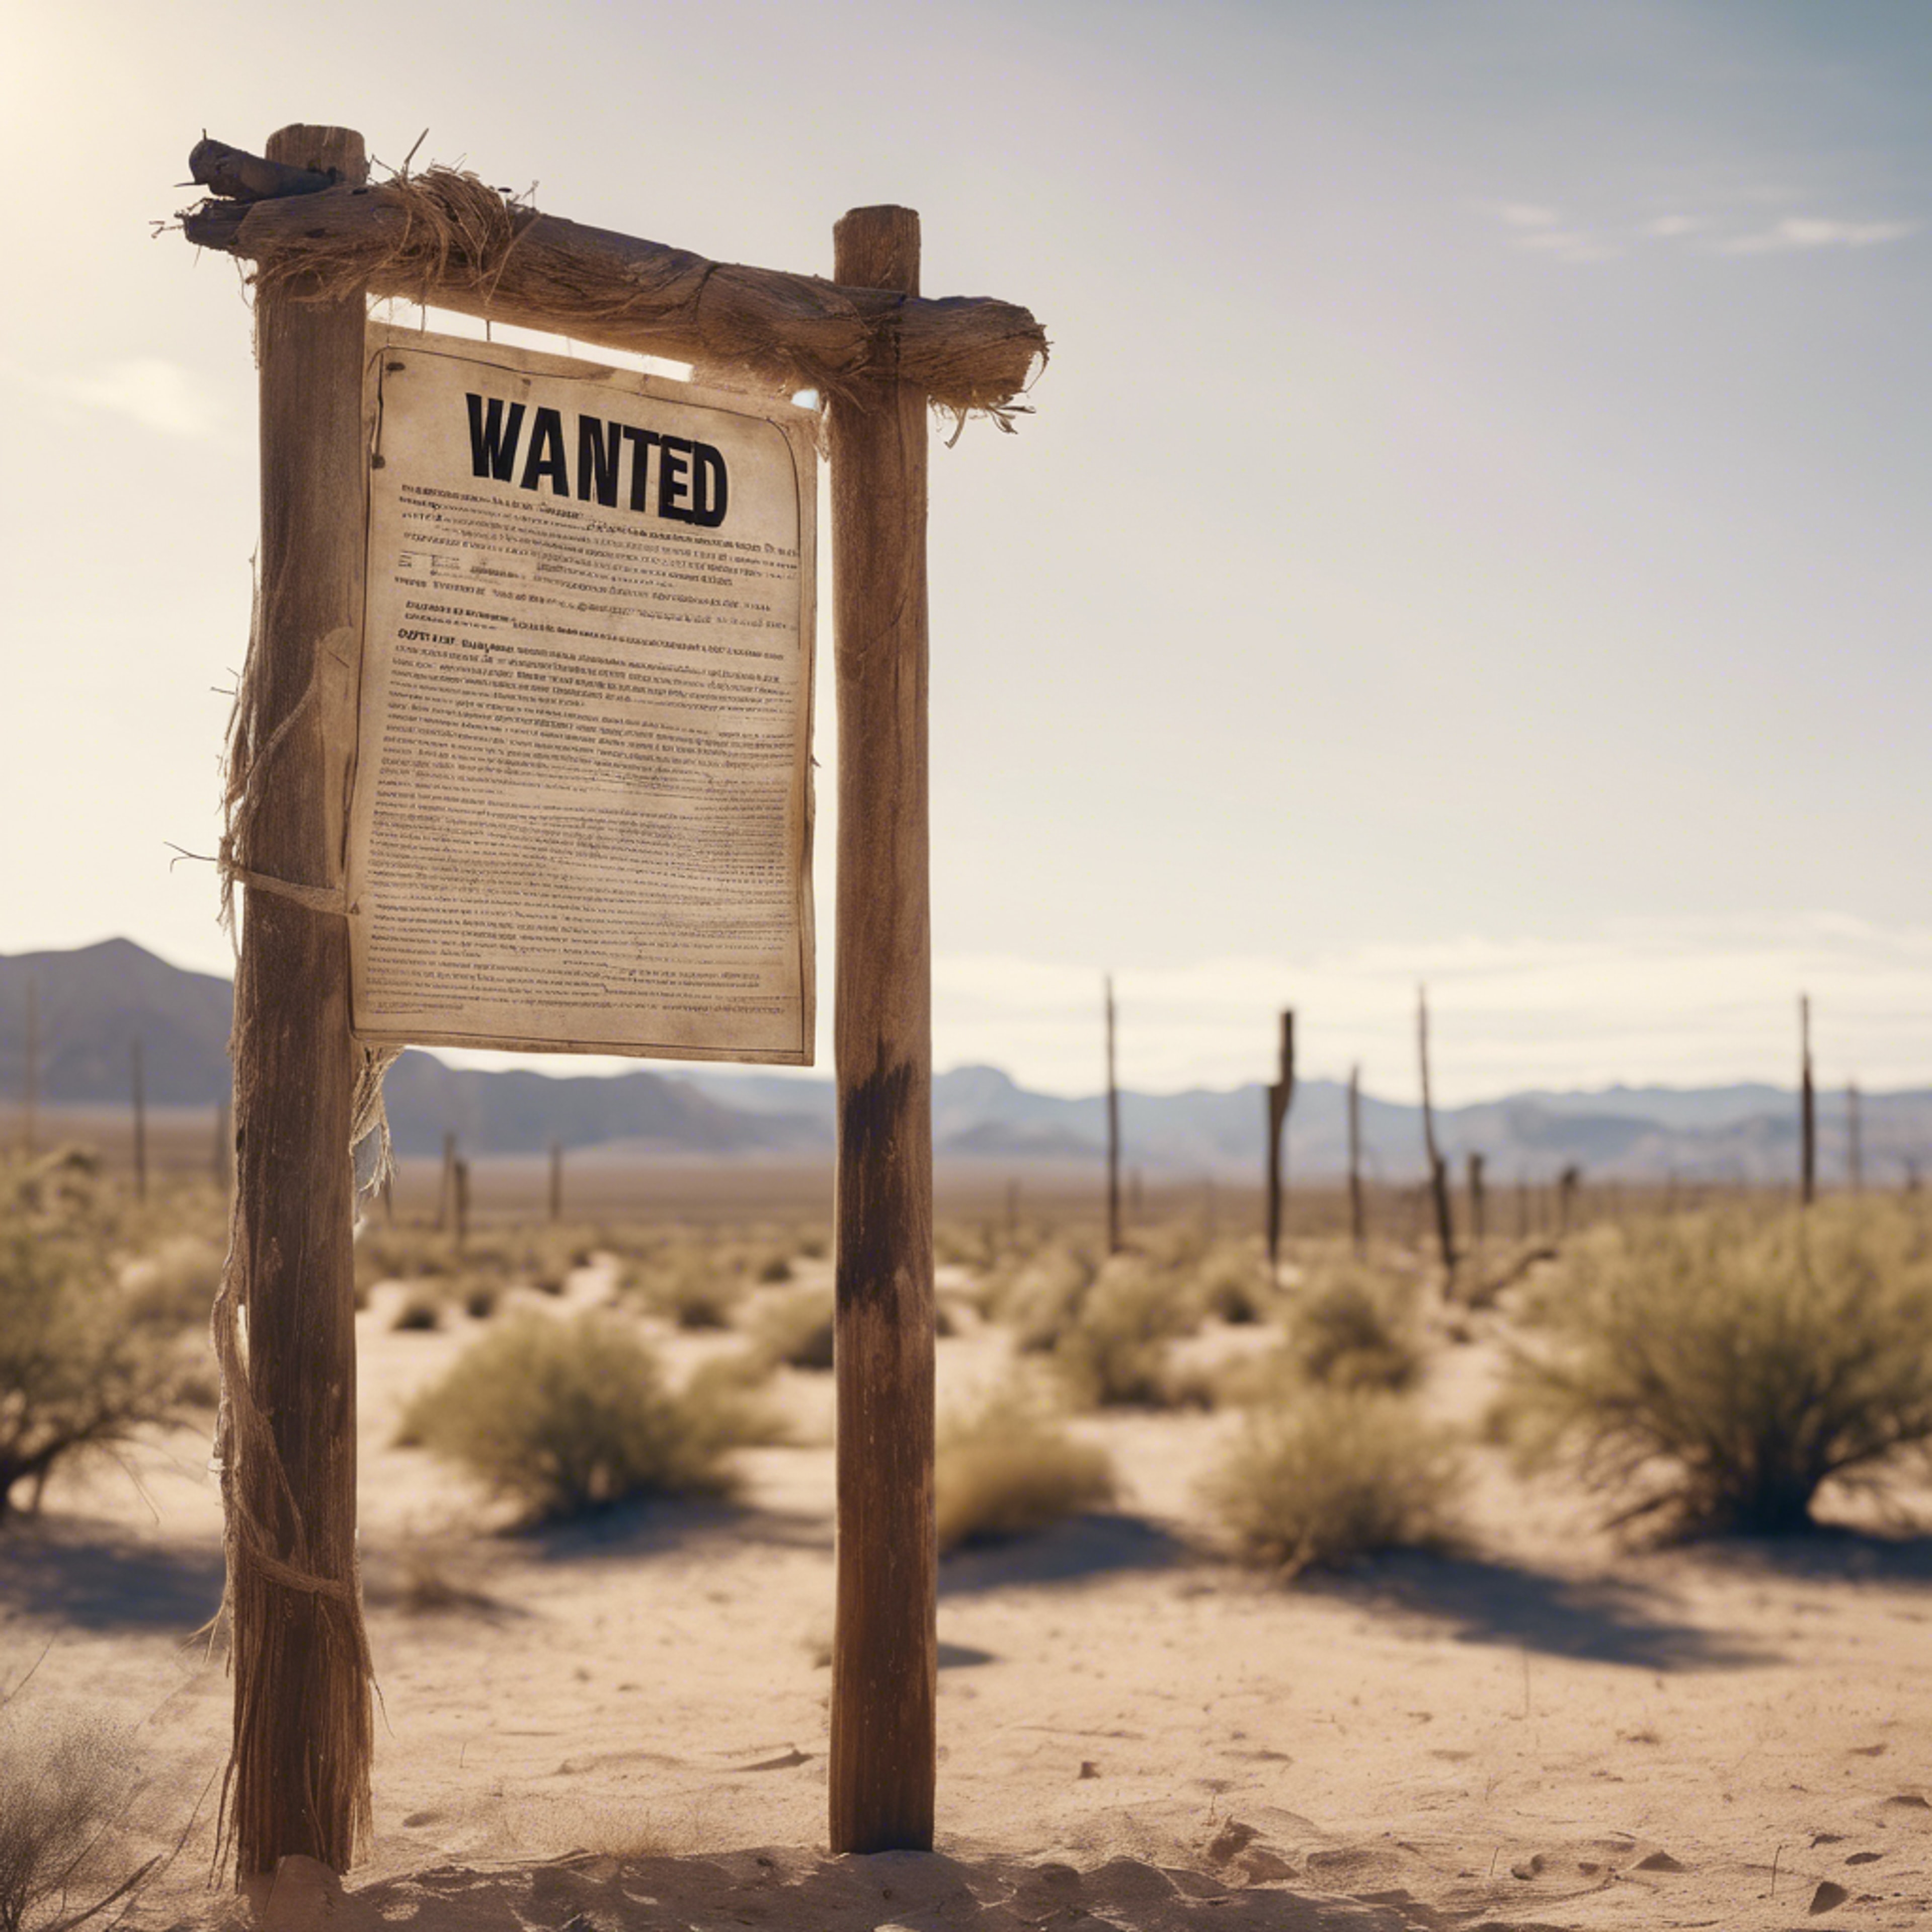 A wanted poster nailed to wooden post in a windy desert town, offering a reward in bold letters. Fondo de pantalla[1e032392f4784d5094da]